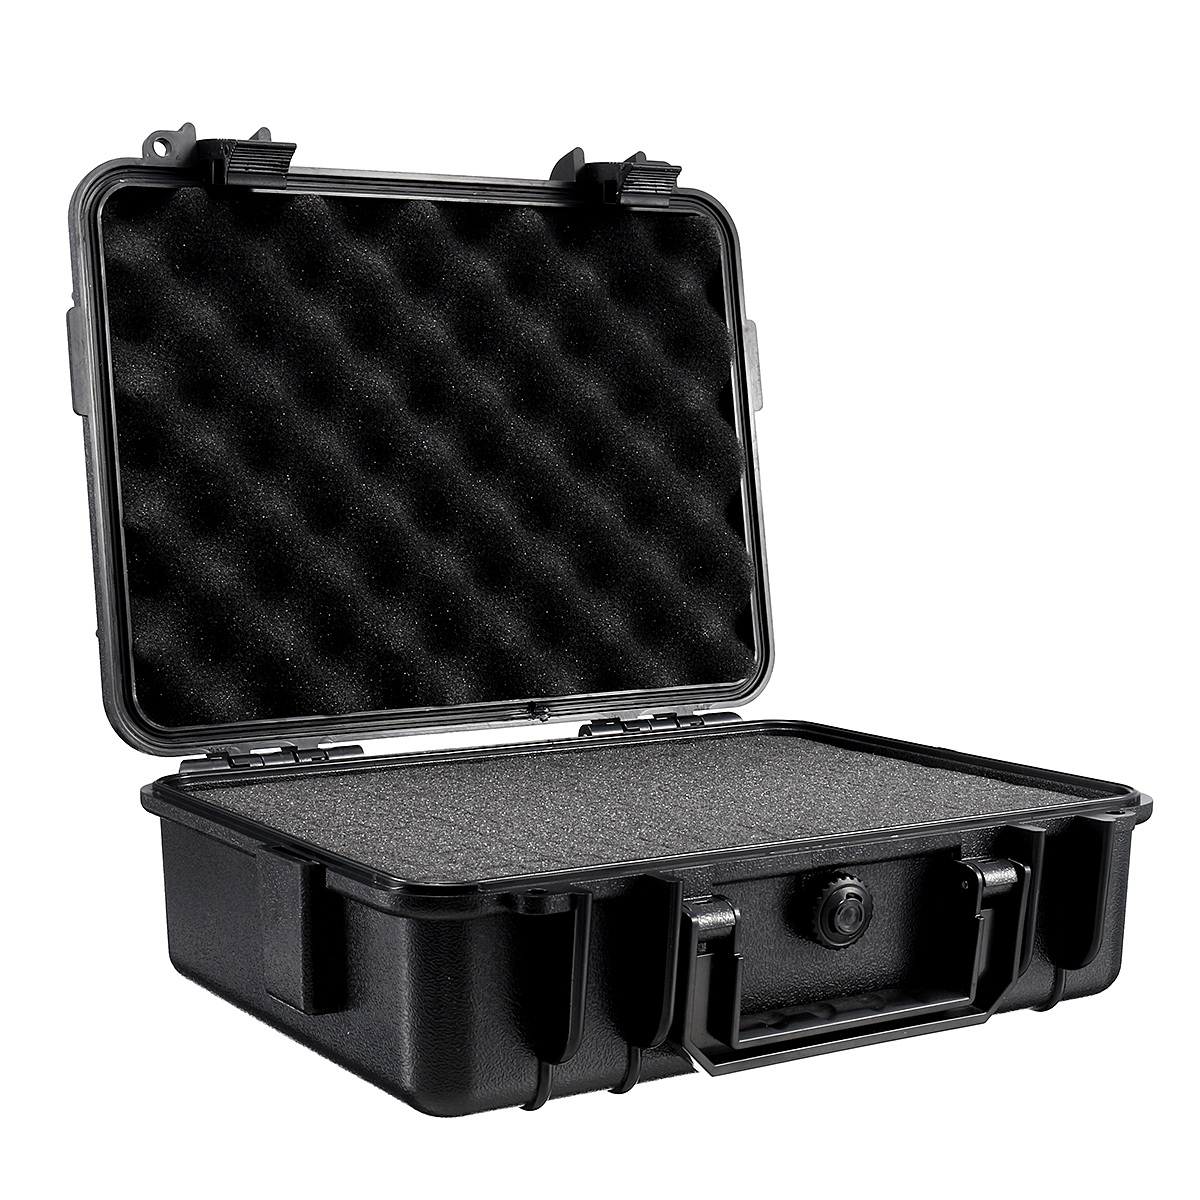 Waterproof-Hard-Carry-Tool-Case-Bag-Storage-Box-Camera-Photography-with-Sponge-1636226-3